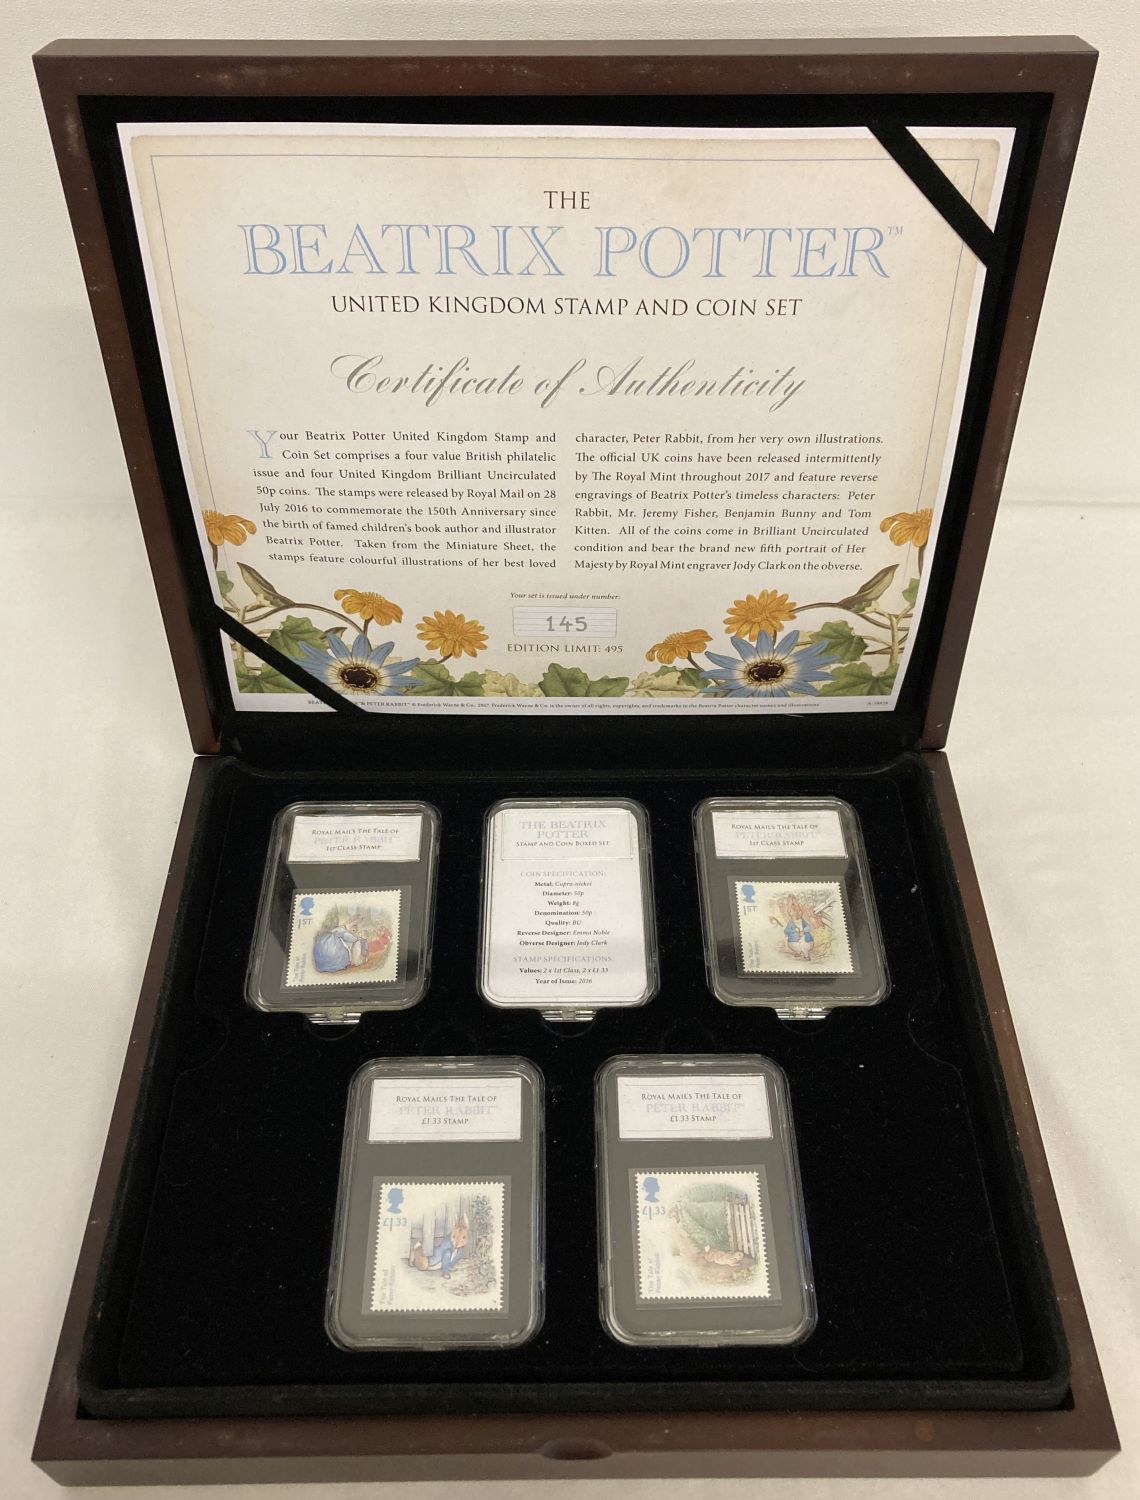 A Limited Edition Beatrix Potter stamp and coin wooden presentation box, limited to 495 pieces.